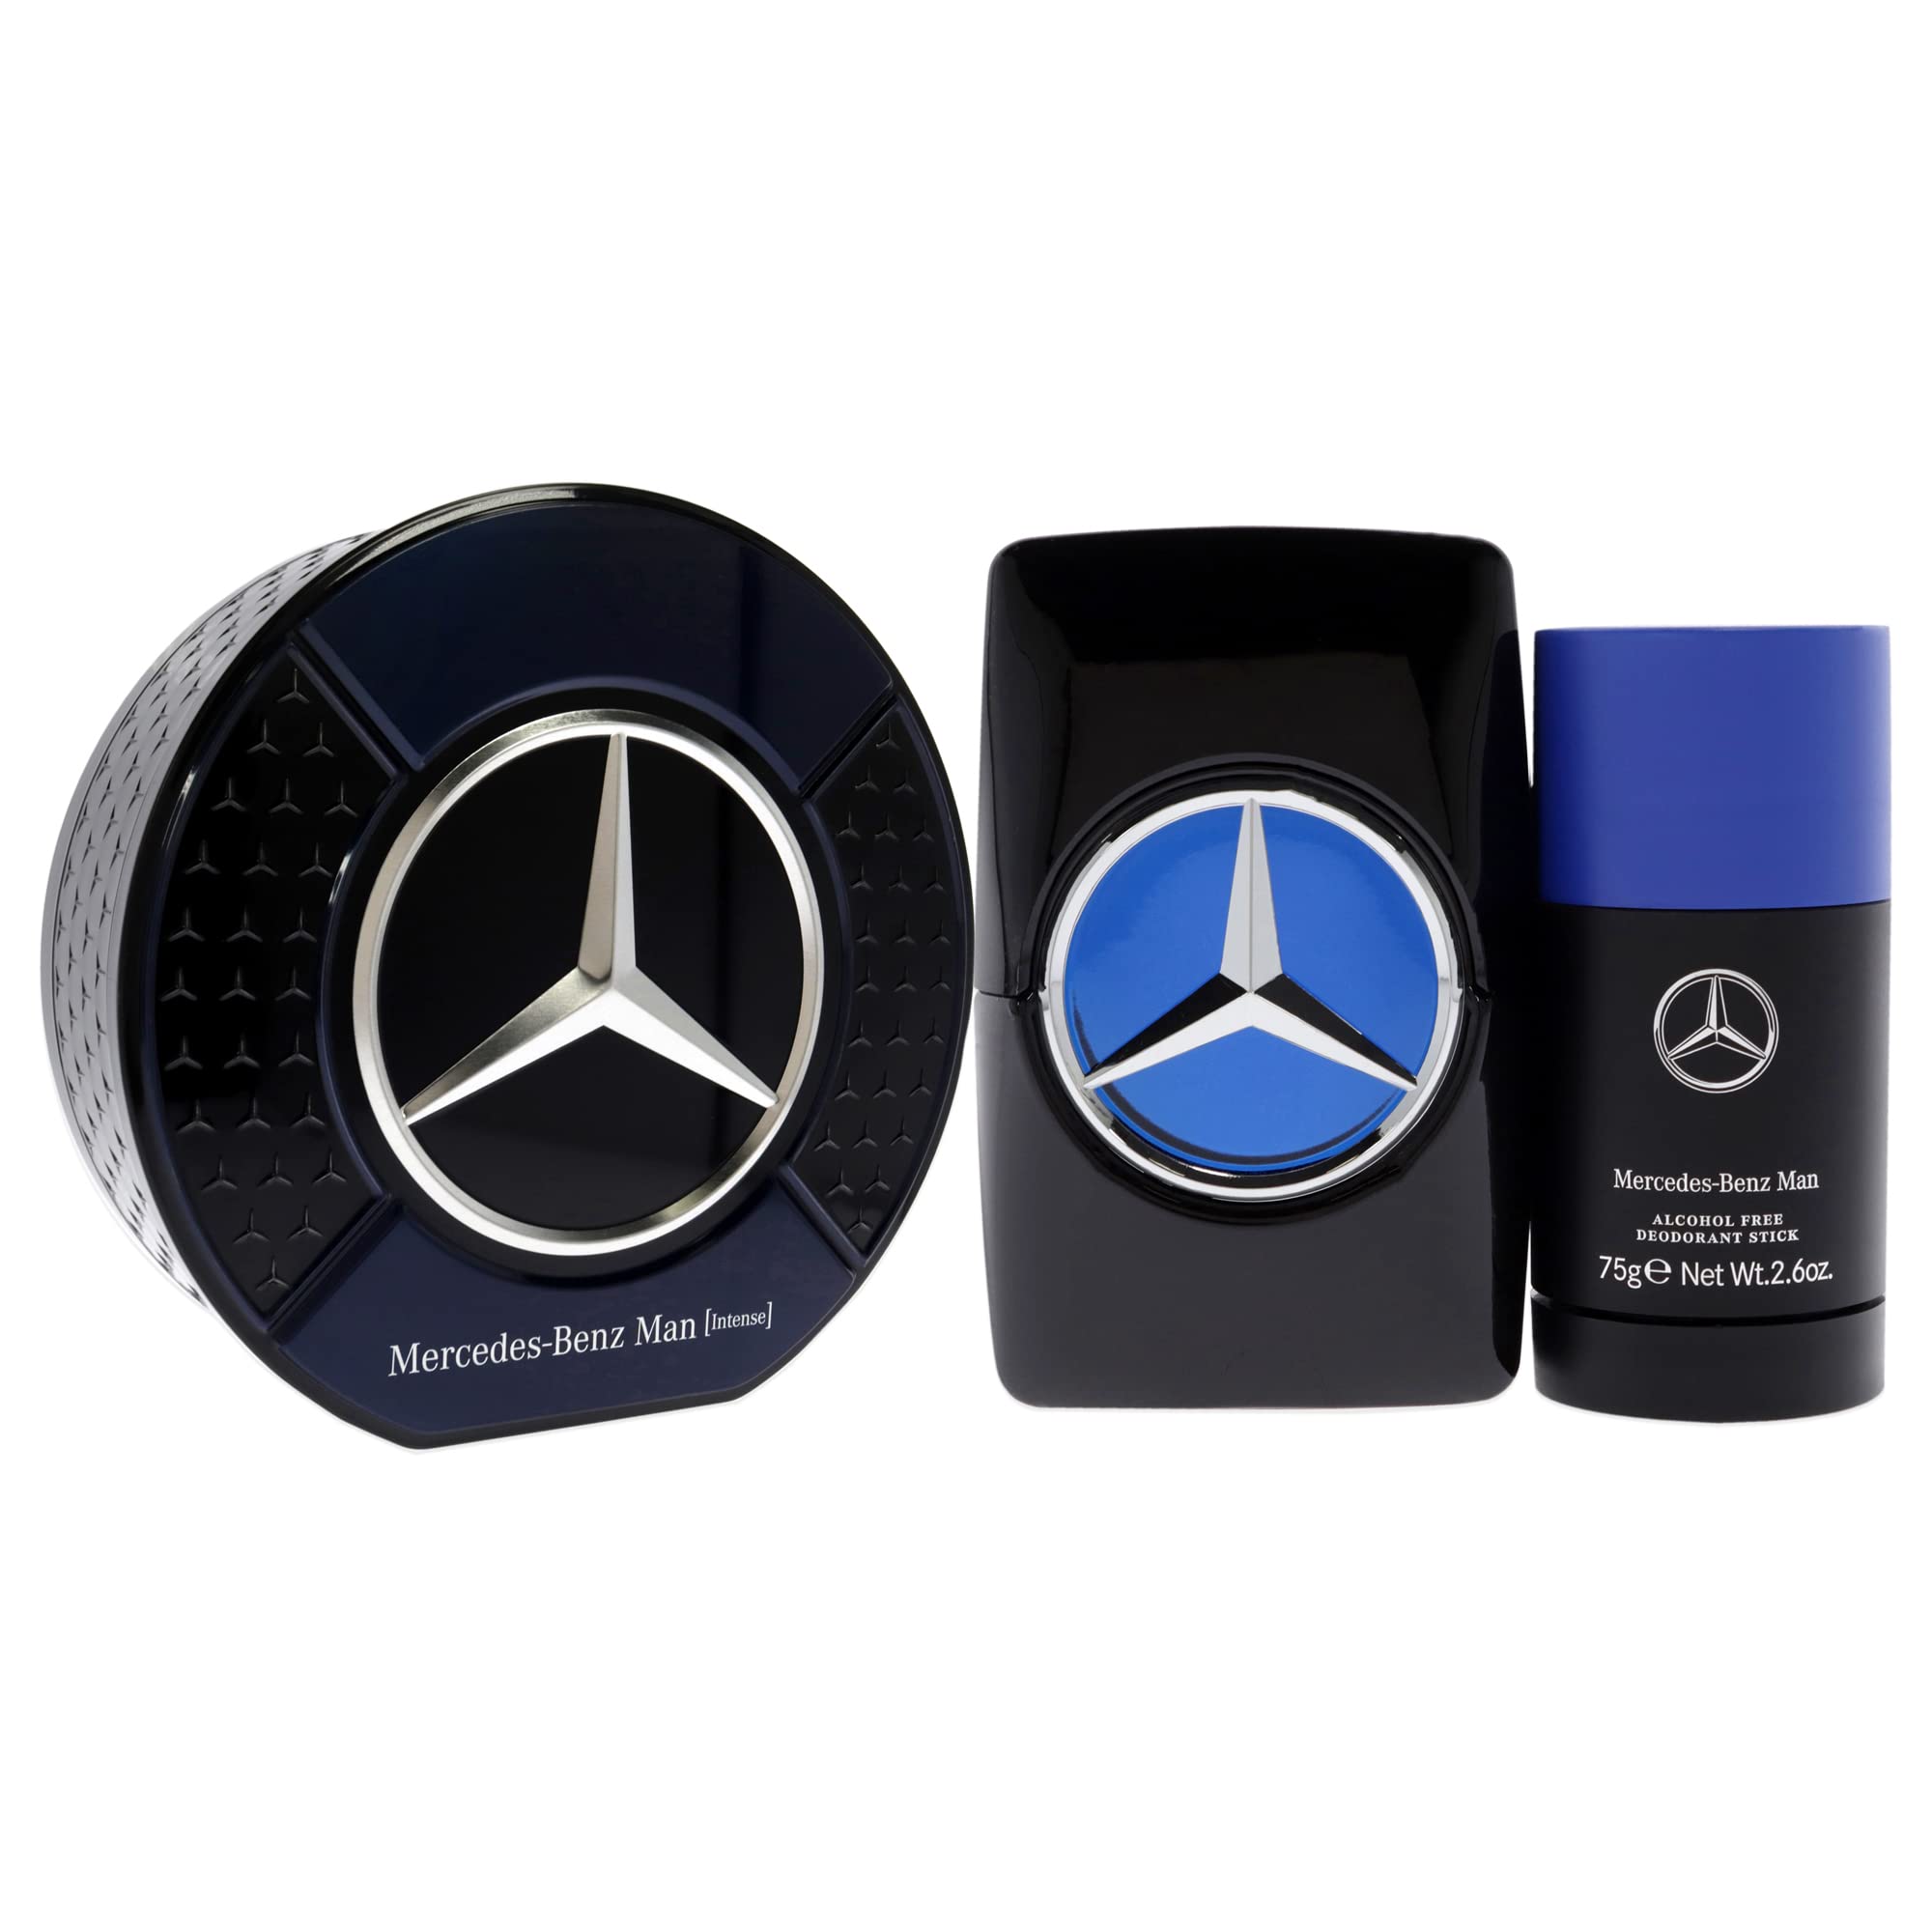 Mercedes-Benz Intense Gift Set Perfumes for Men - Includes 2.7 oz Eau de Toilette Spray and 2.6 oz Deodorant Stick - Woody Scent - Opens with Notes of Pear - Evokes Power and Sensuality - 2 pc